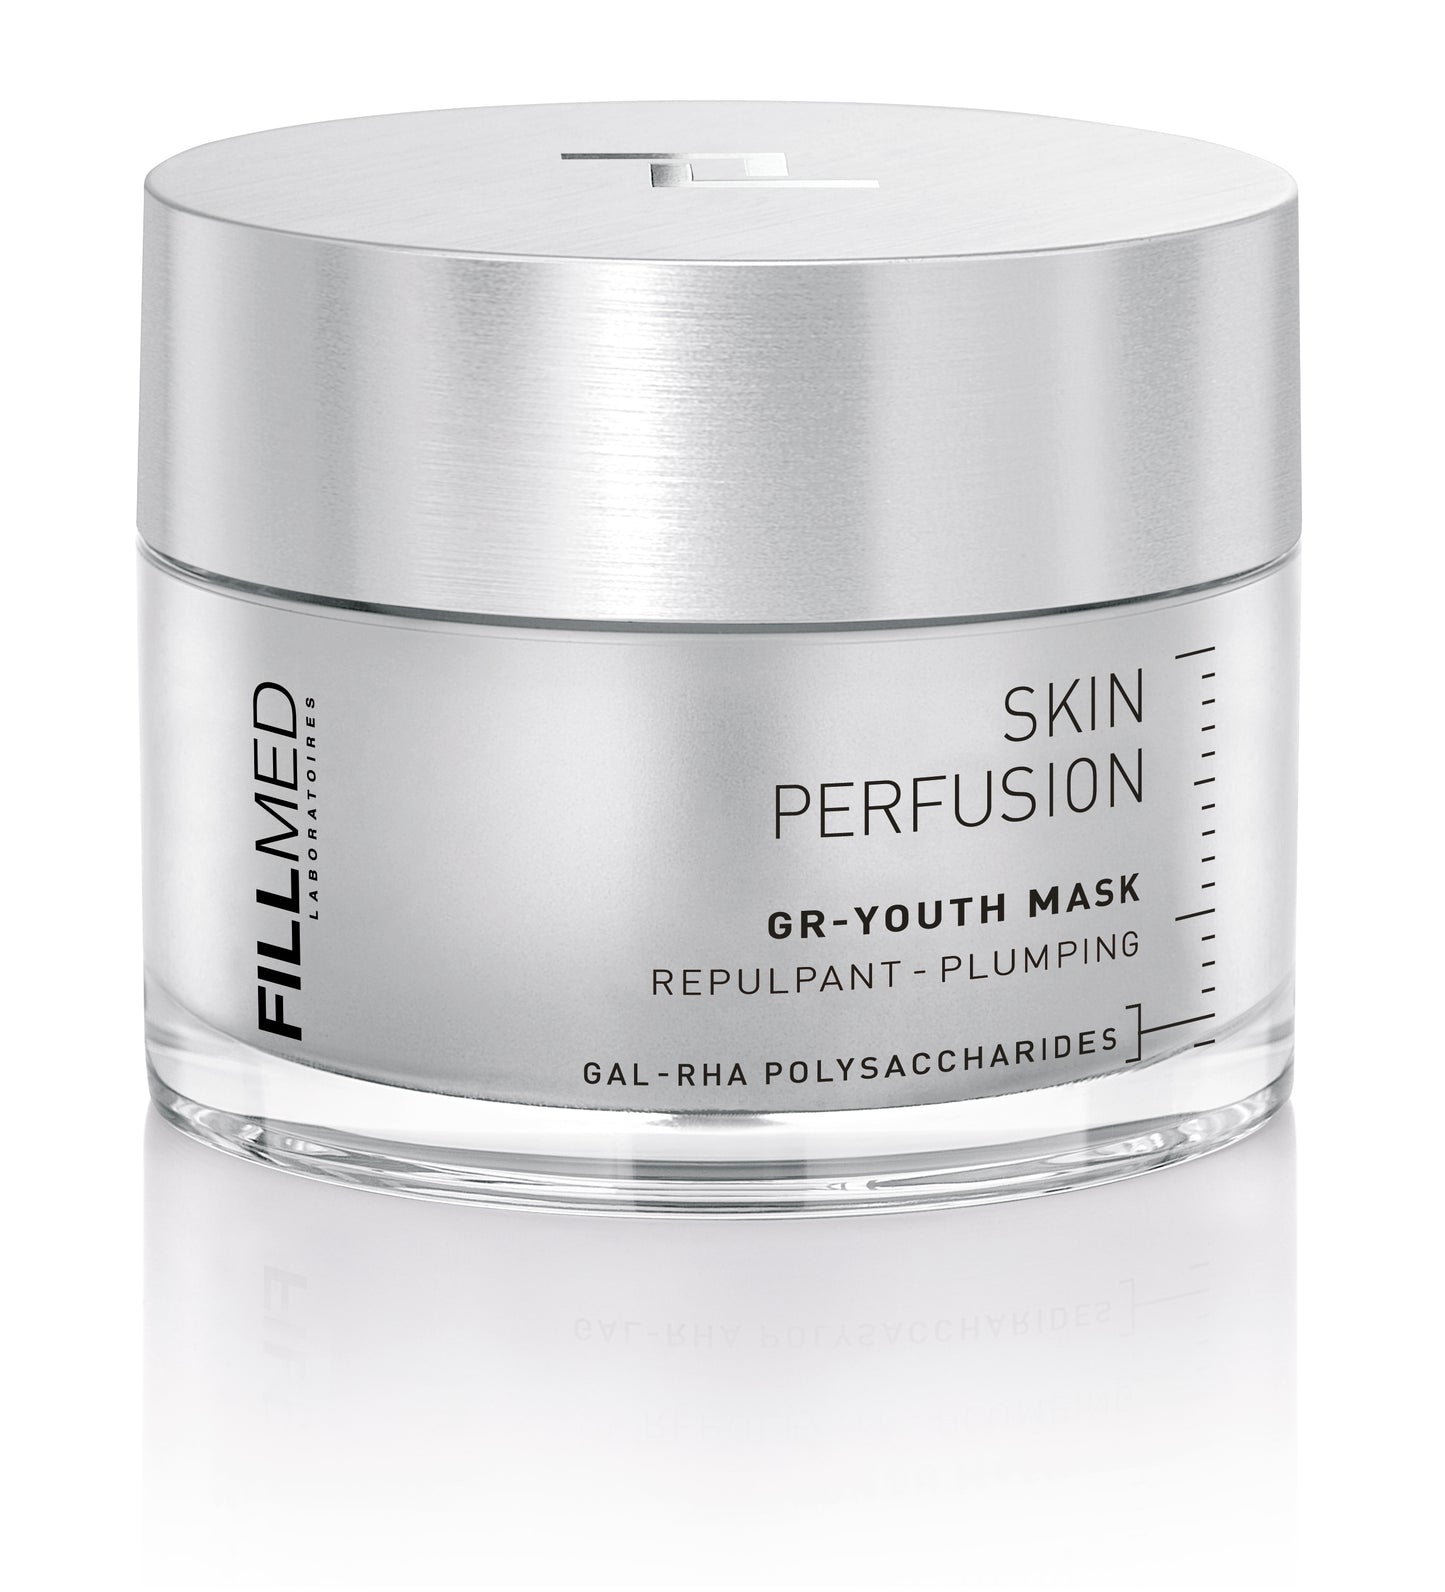 Skin Perfusion Gr-Youth Mask